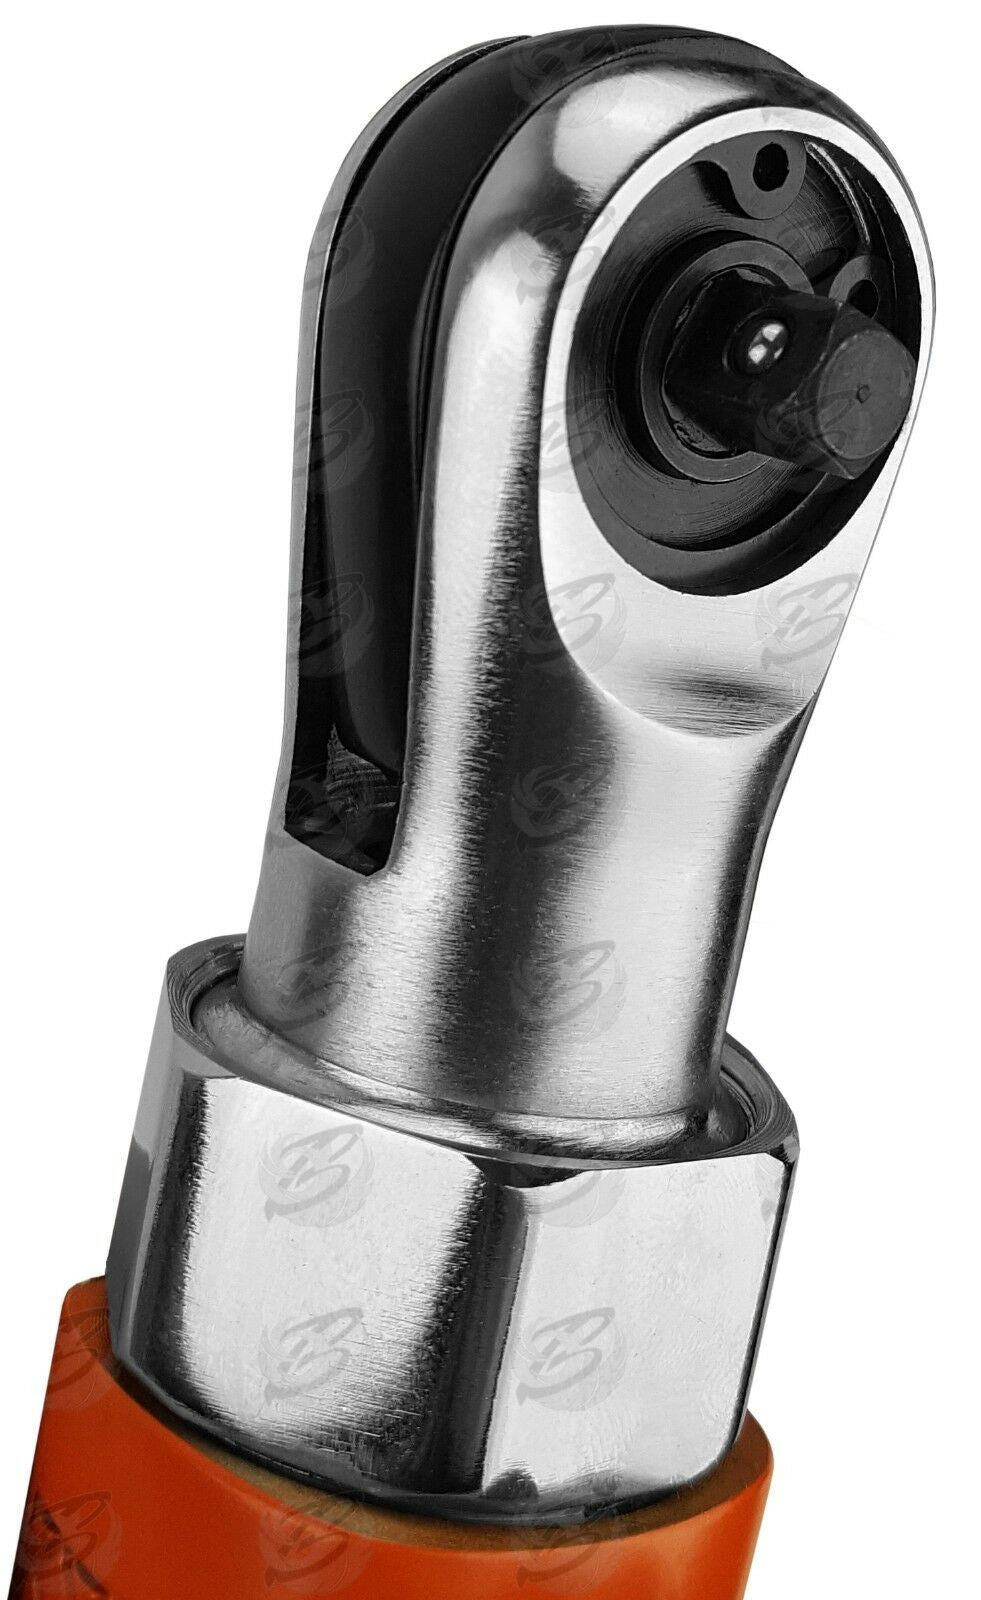 TOOLZONE 1/4" DRIVE STUBBY AIR IMPACT RATCHET WRENCH